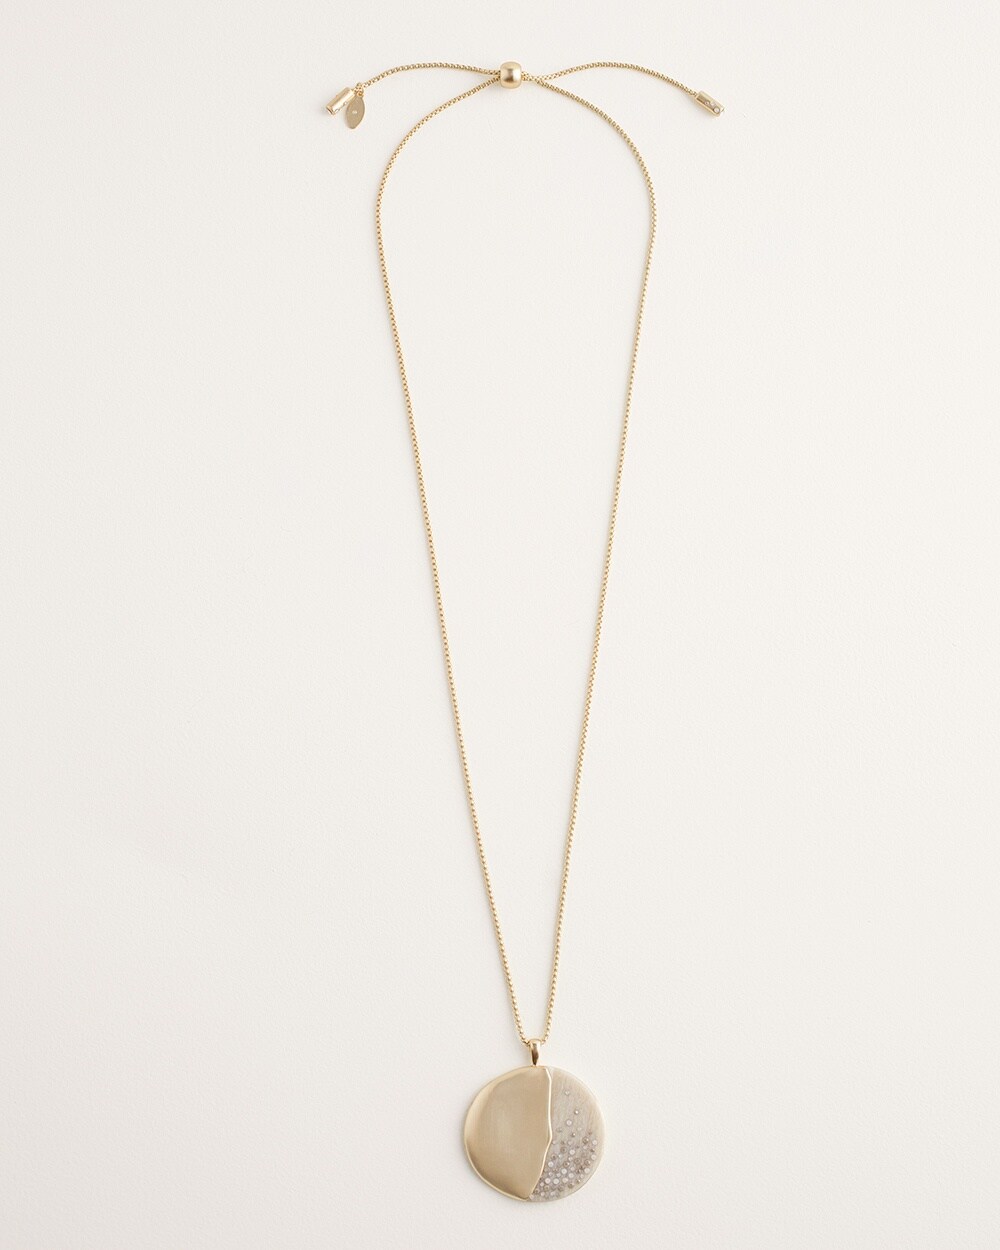 Convertible Goldtone and Neutral Pendant Necklace